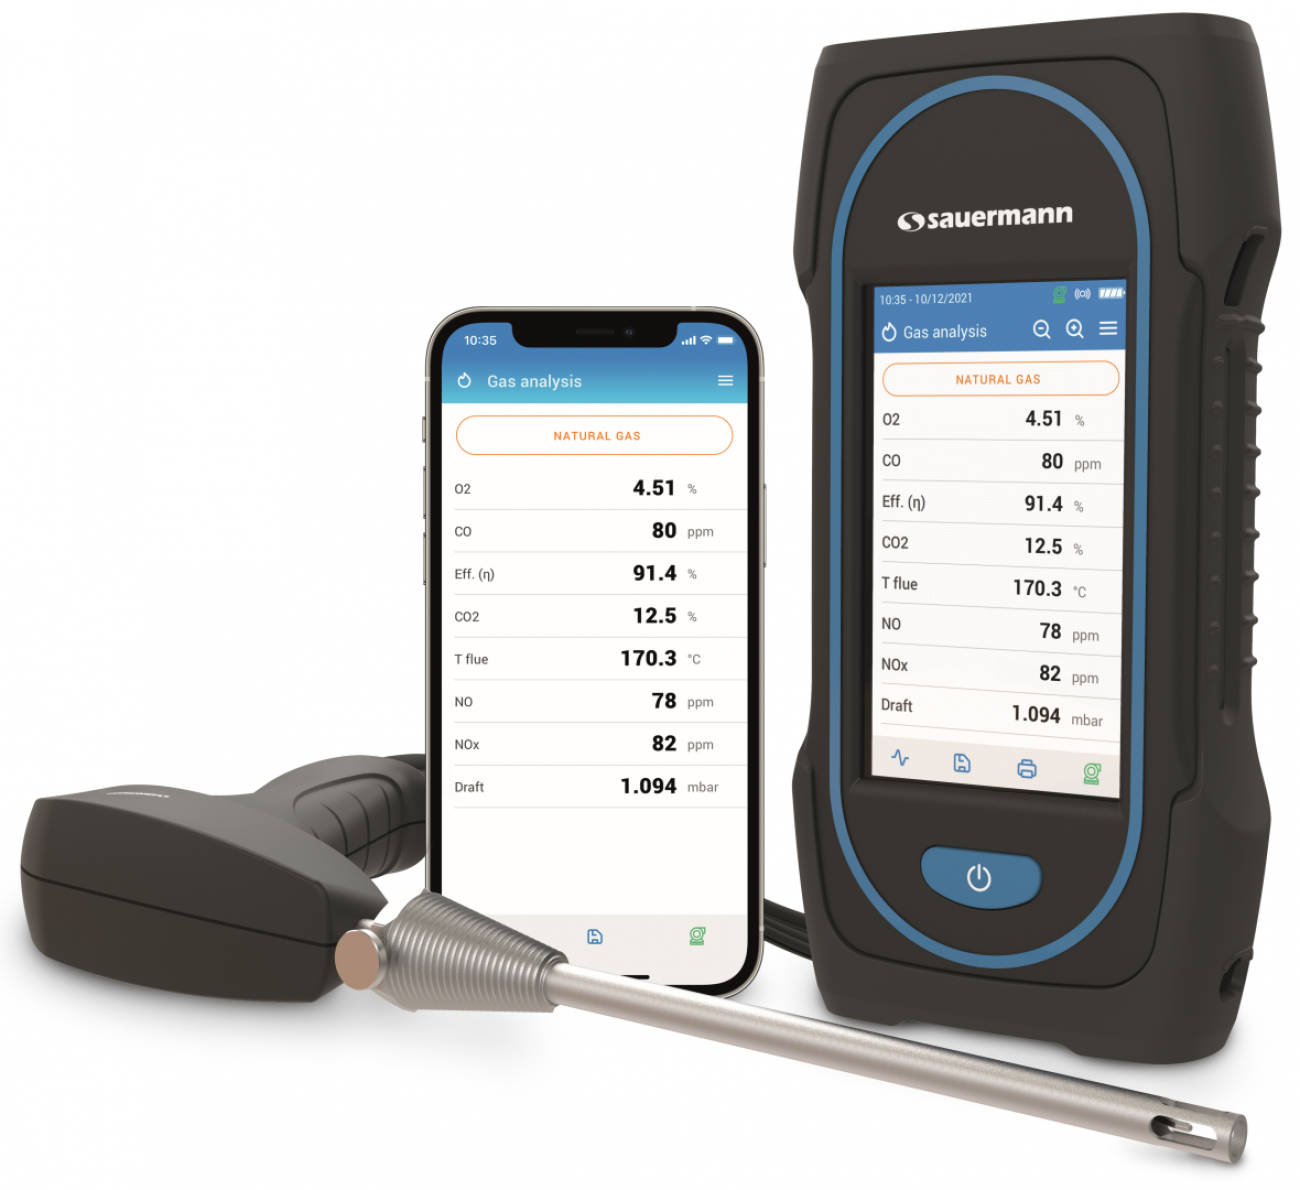 Comprehensive, versatile analyser with touch-screen display